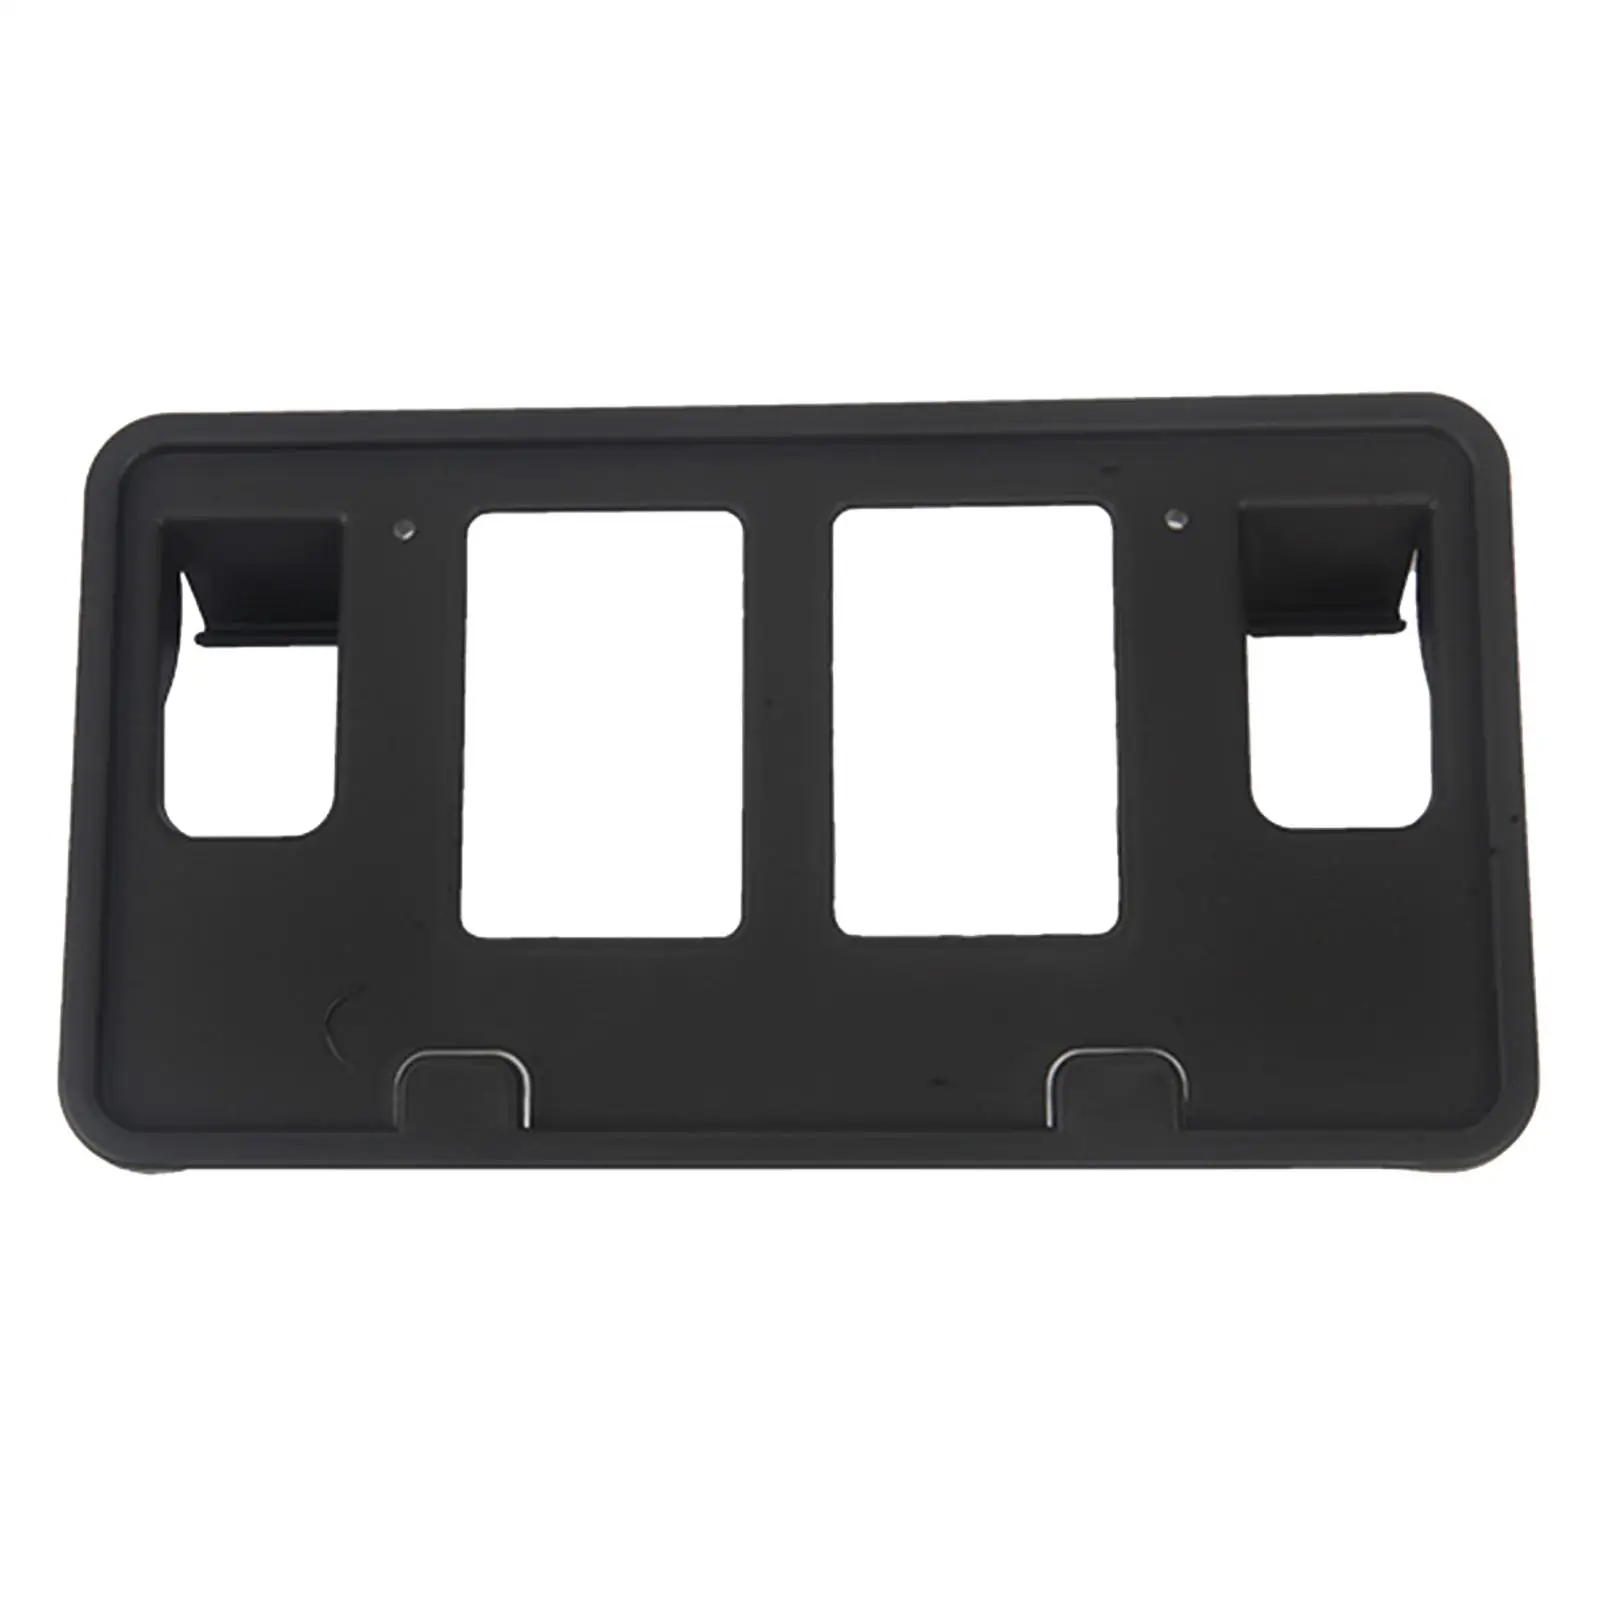 Front License Plate Holder Backing Bracket Plastic Fit for Ford F150 06-08 Easy Installation Auto Parts Car Supplies Premium